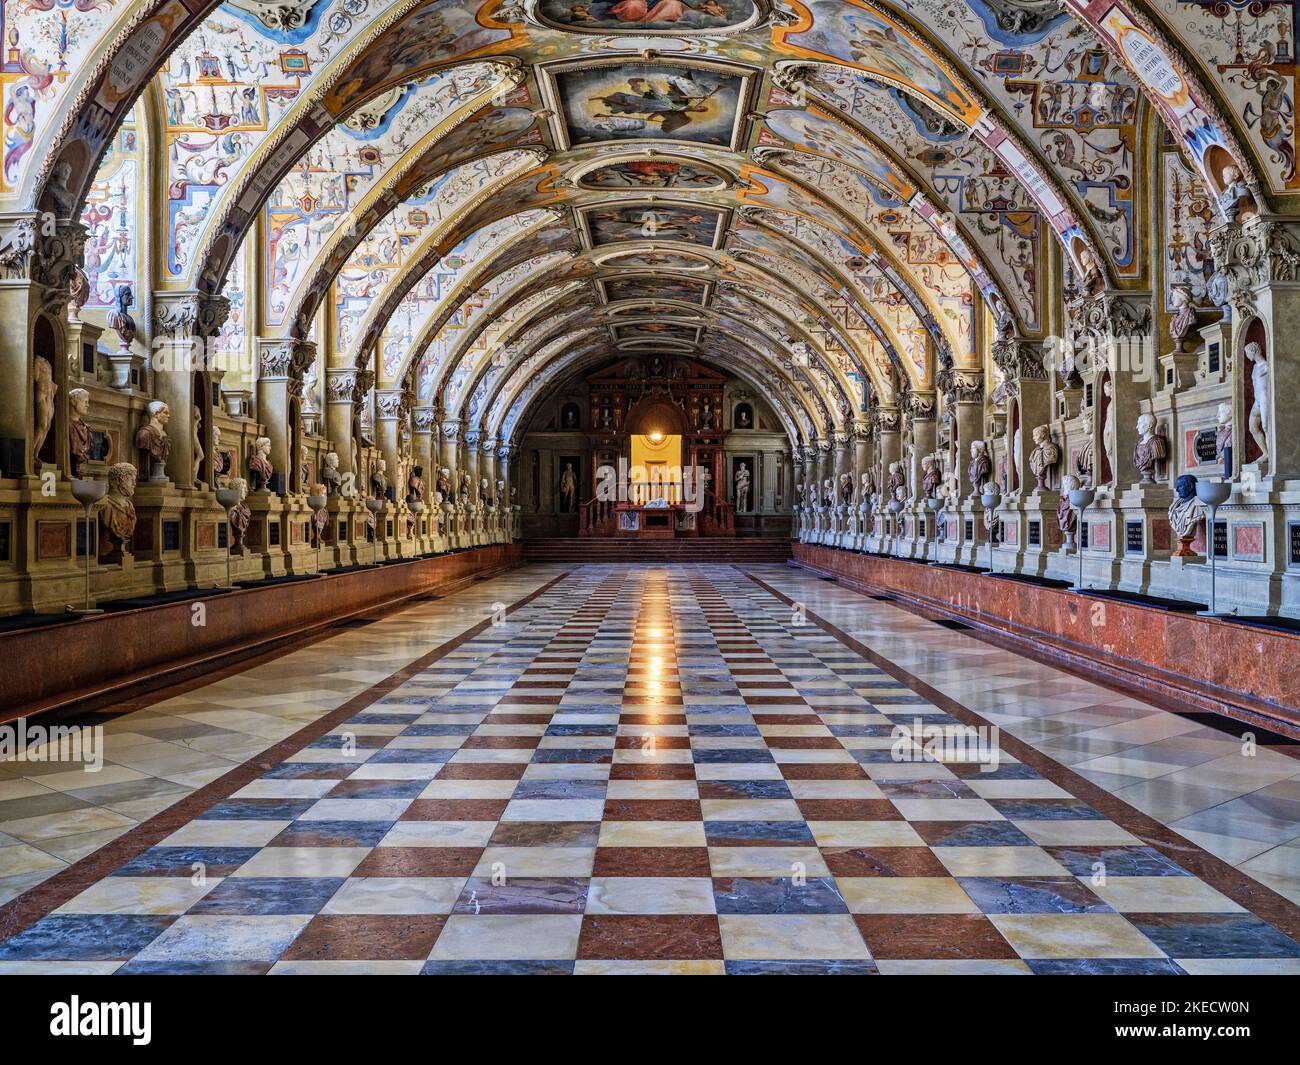 Antiquarium, largest Renaissance hall north of the Alps in the Munich Residence. Stock Photo